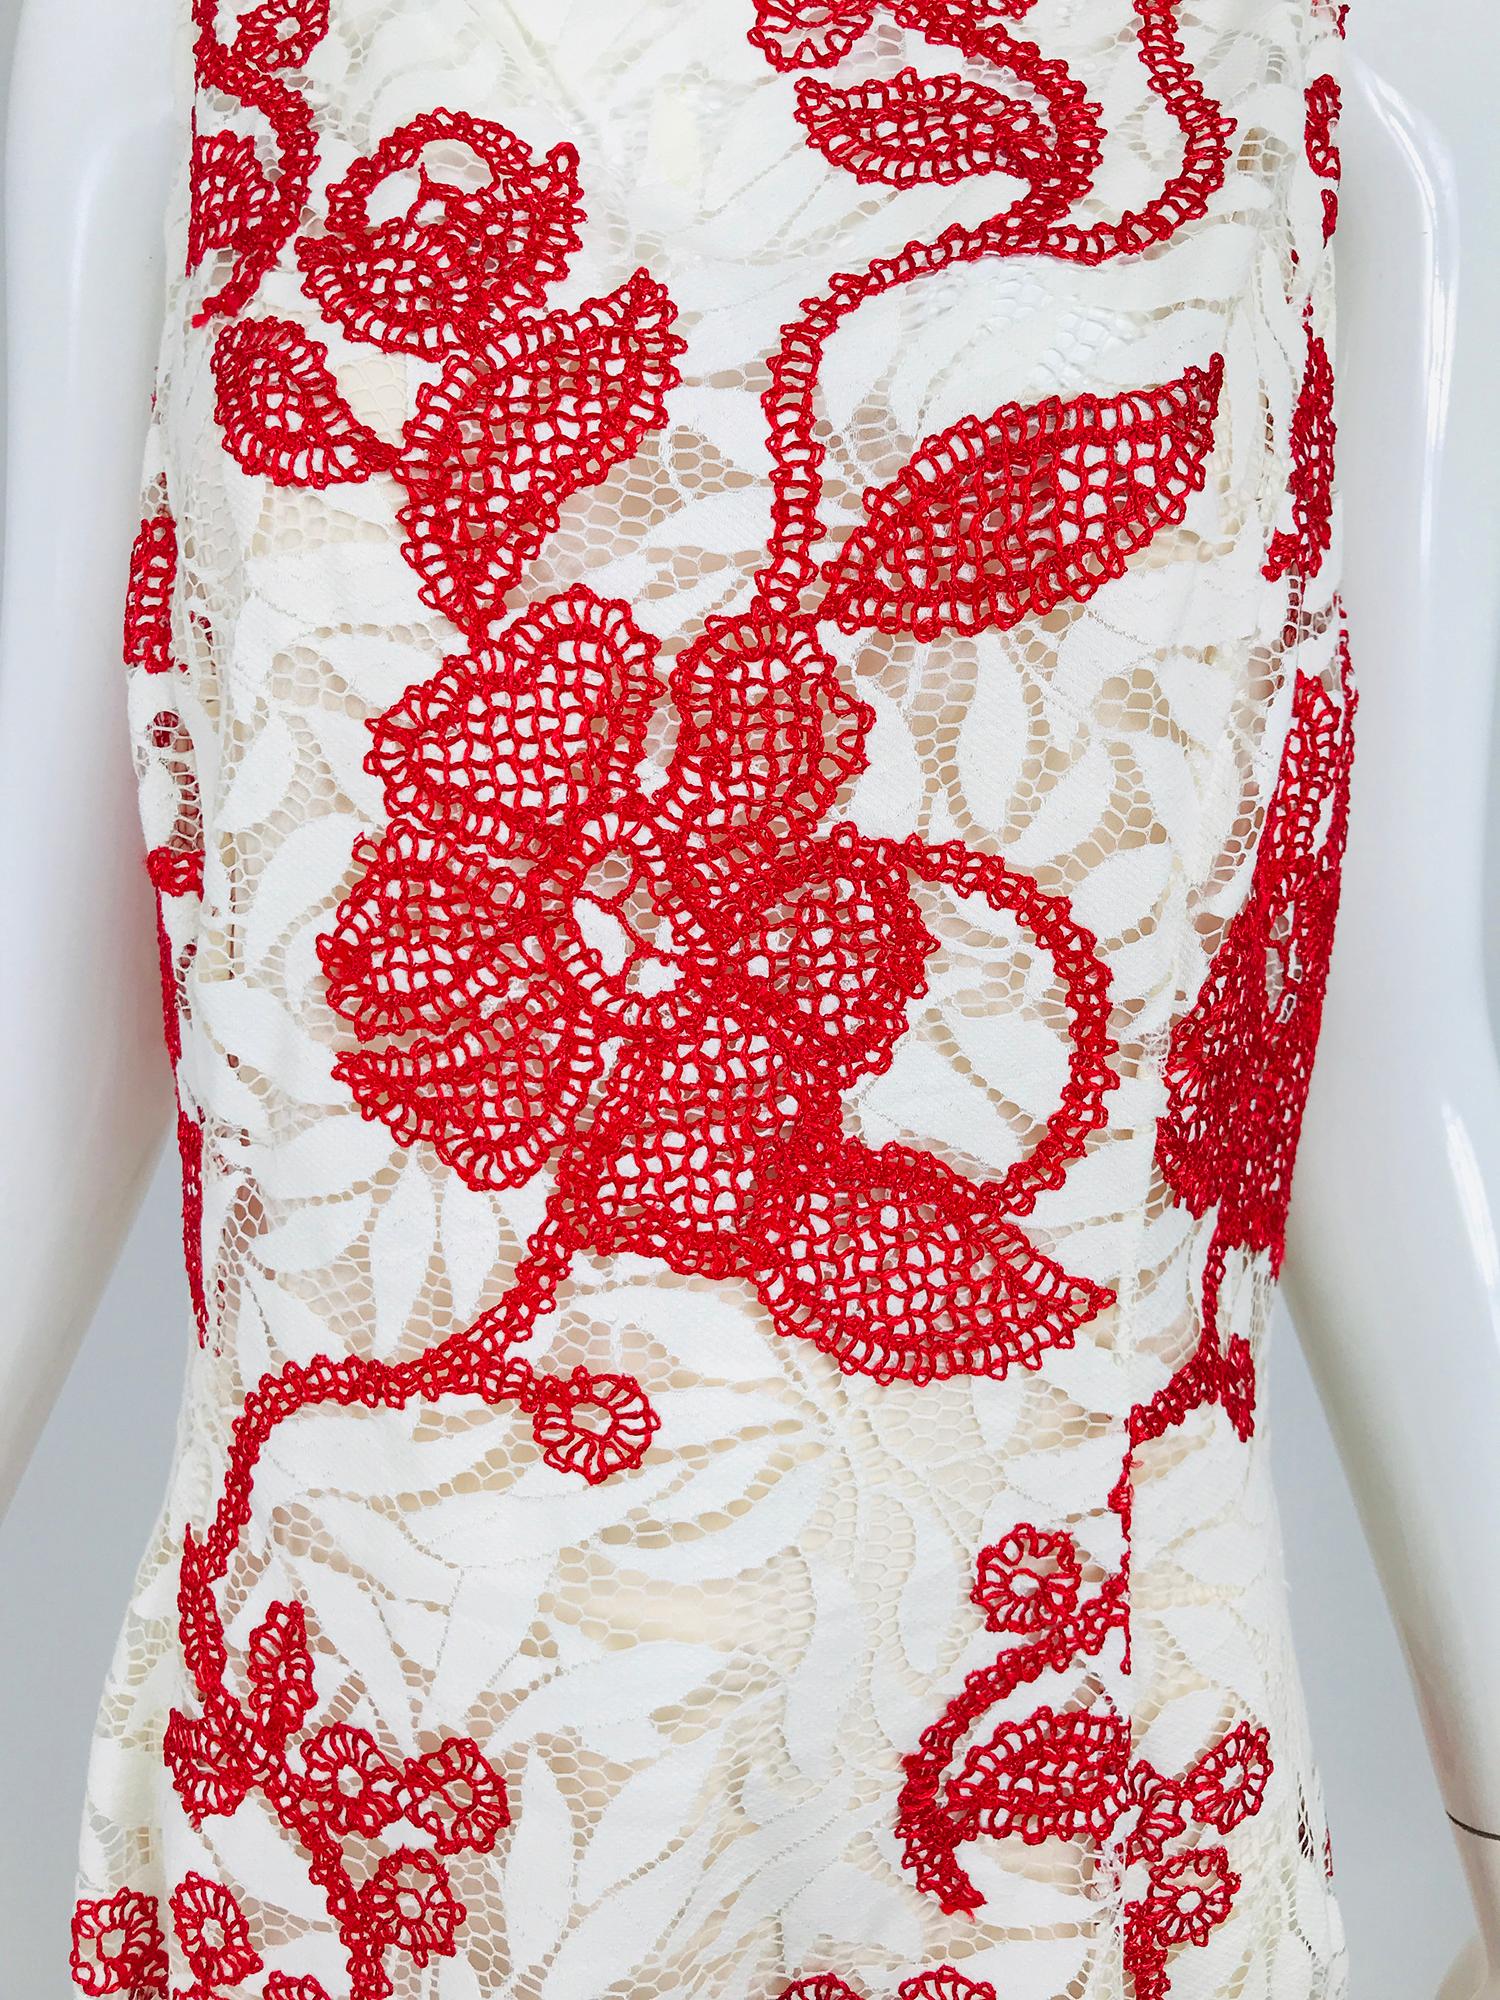 Oscar de la Renta red and white lace tunic top together with nude silk chiffon camisole. White grosgrain ribbon straps, the top is white lace over embroidered with silky red lace, cut long and flared, it's perfect with white trousers.  Marked size